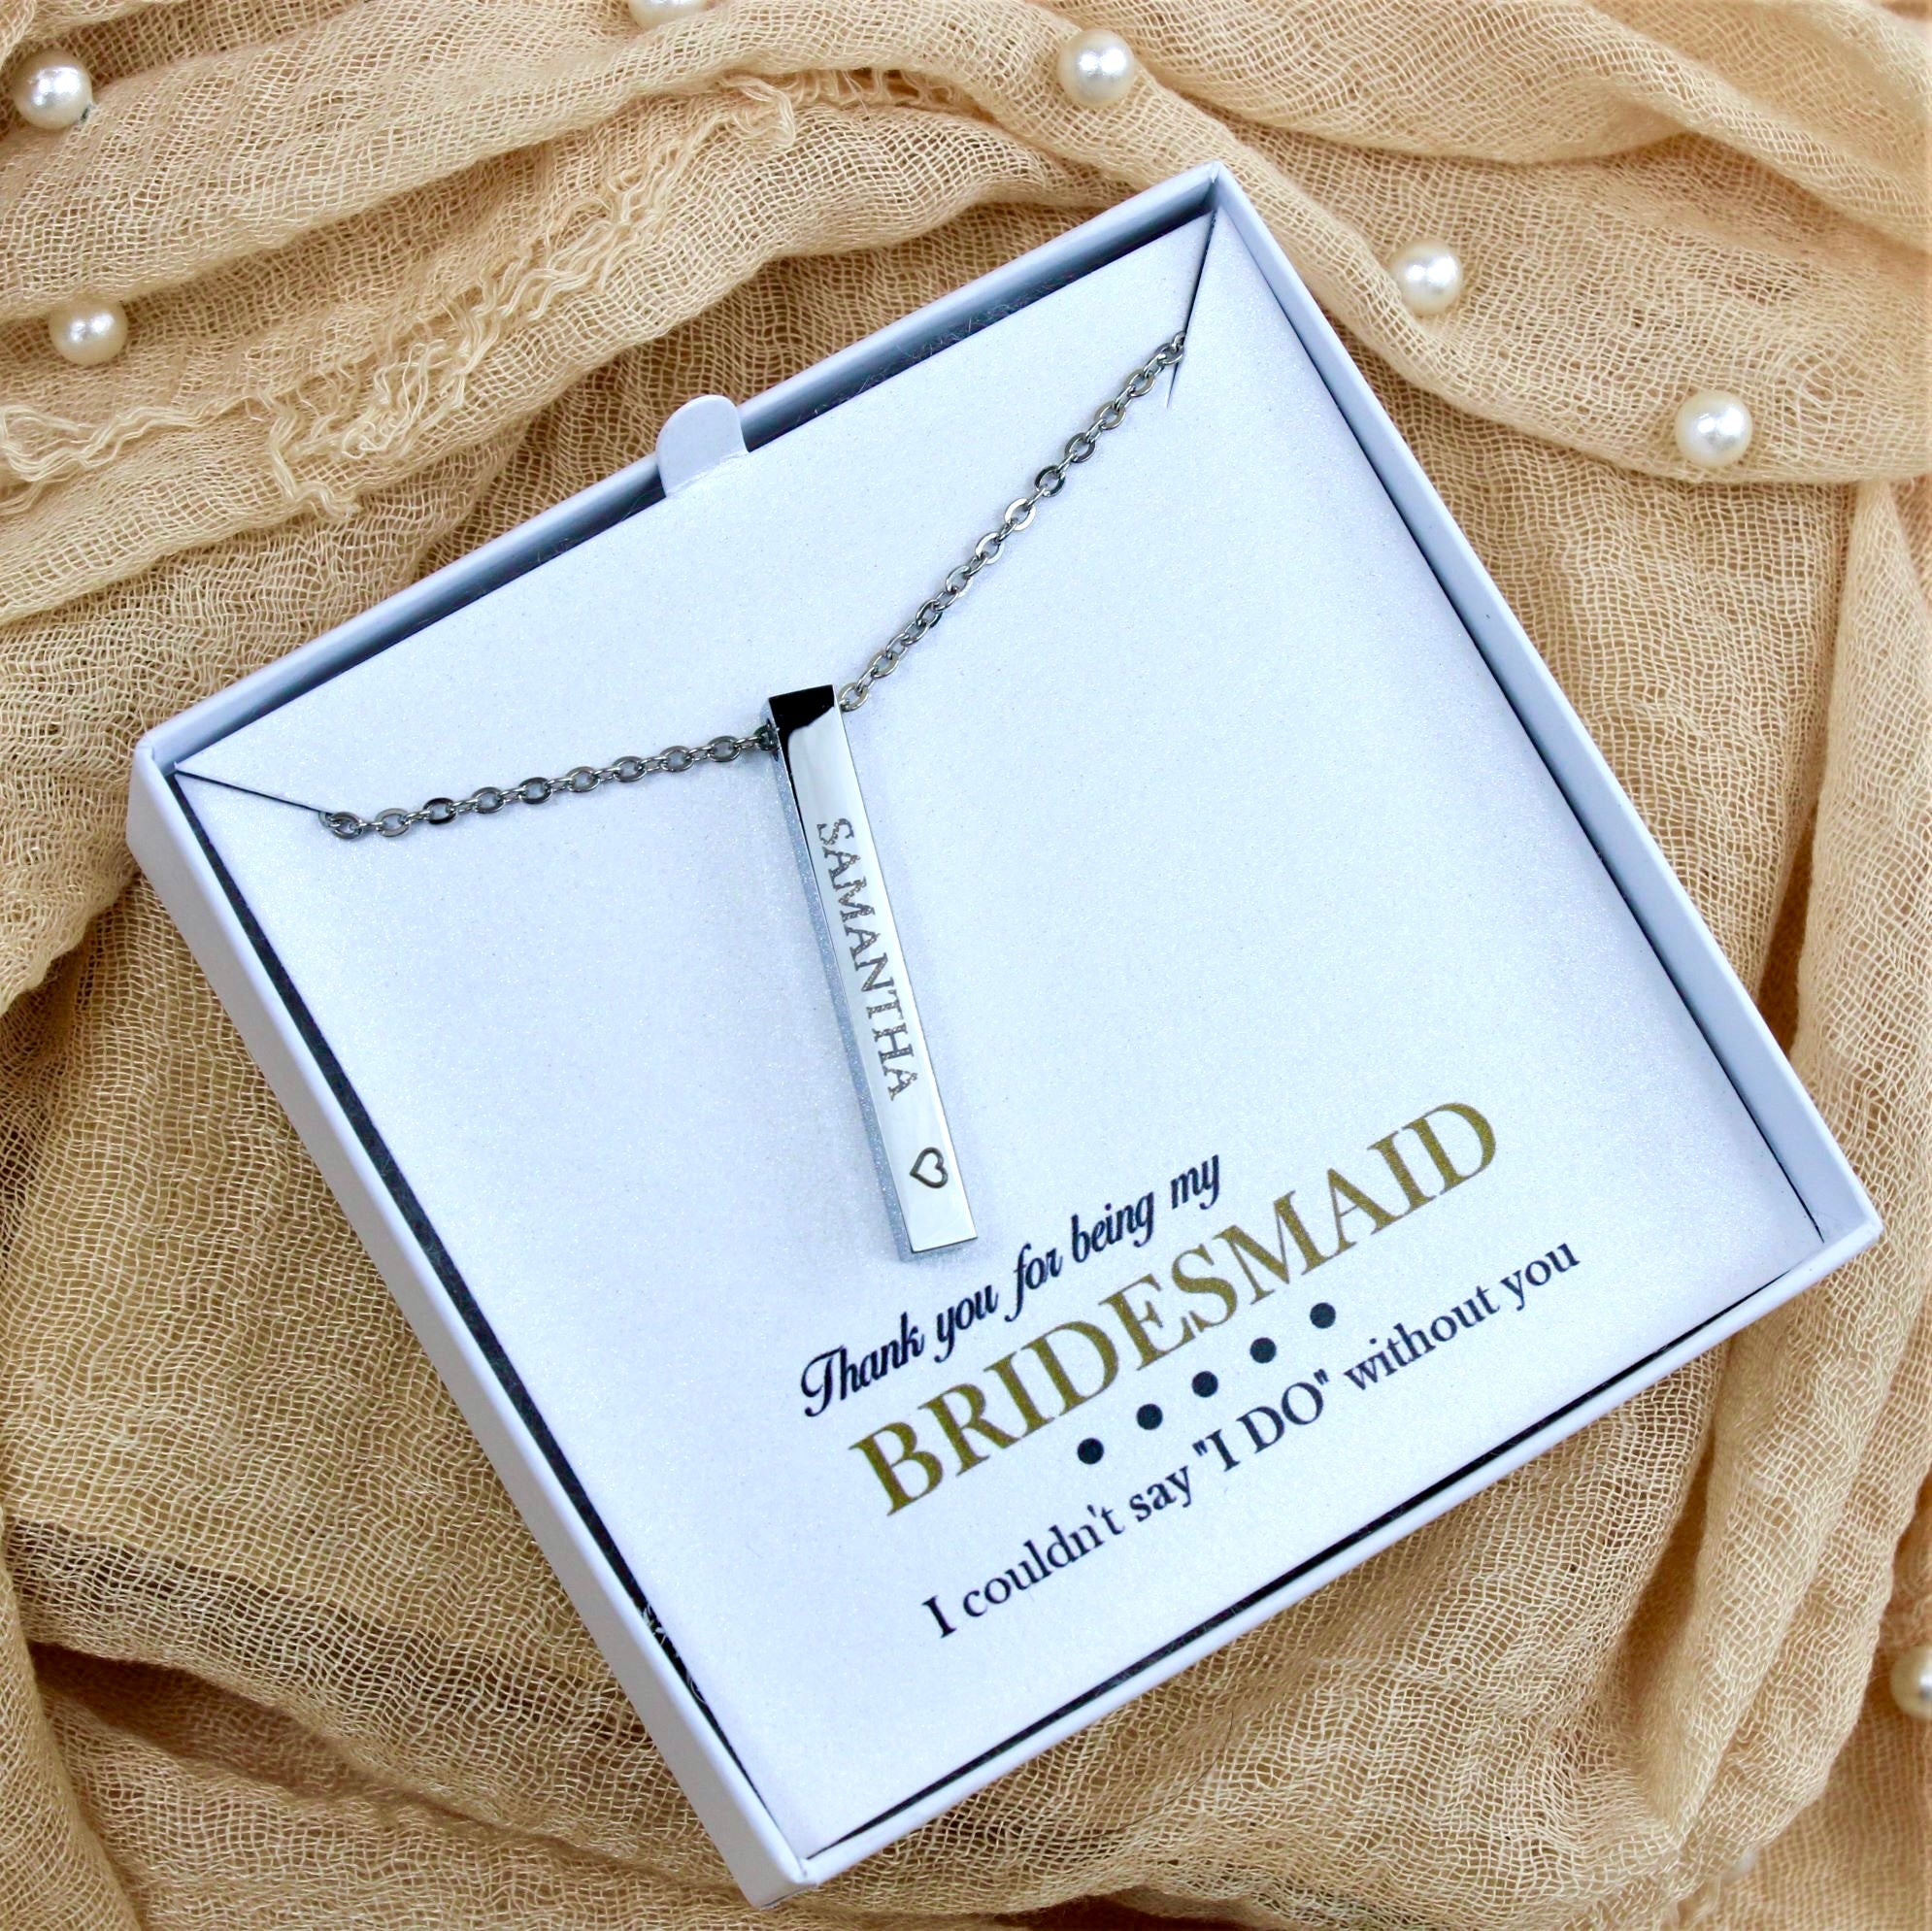 Bridal Jewelry Double Ring Necklace with Proposal Jewelry Card for  Bridesmaid, Maid of Honor, Matron of Honor - Bridesmaid Gifts Boutique